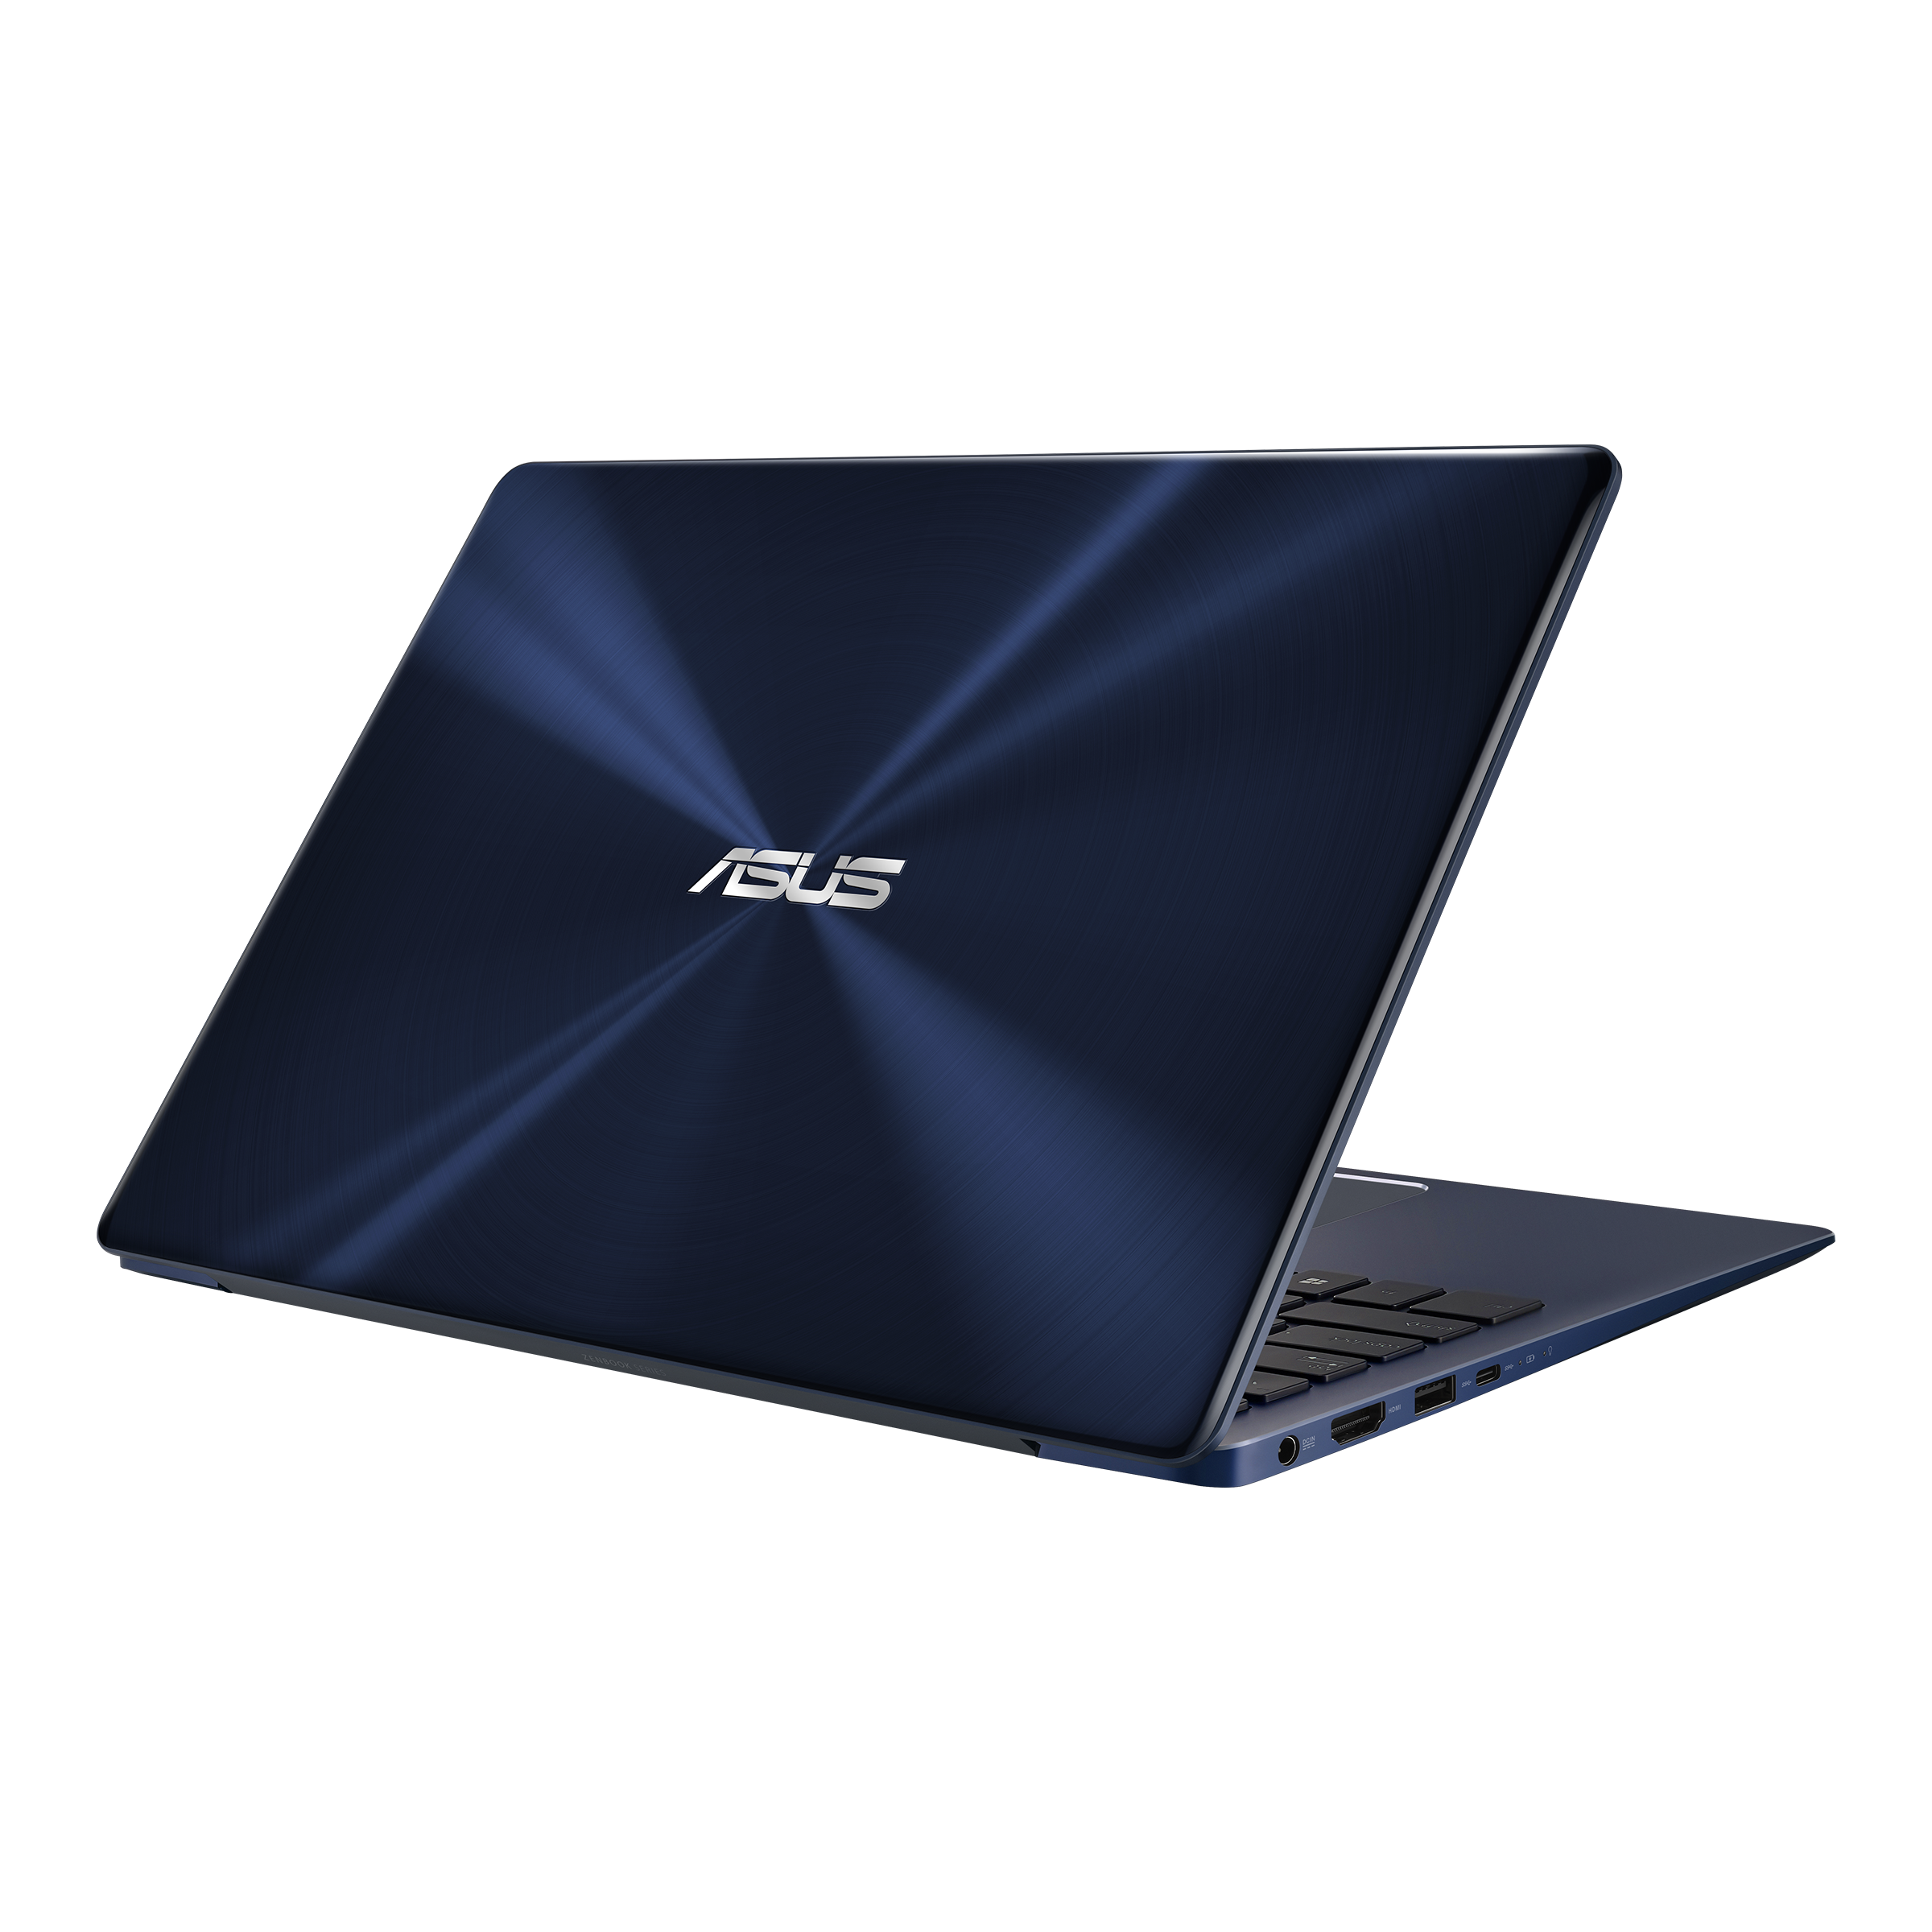 ASUS Zenbook 13 UX331｜Laptops For Home｜ASUS Canada